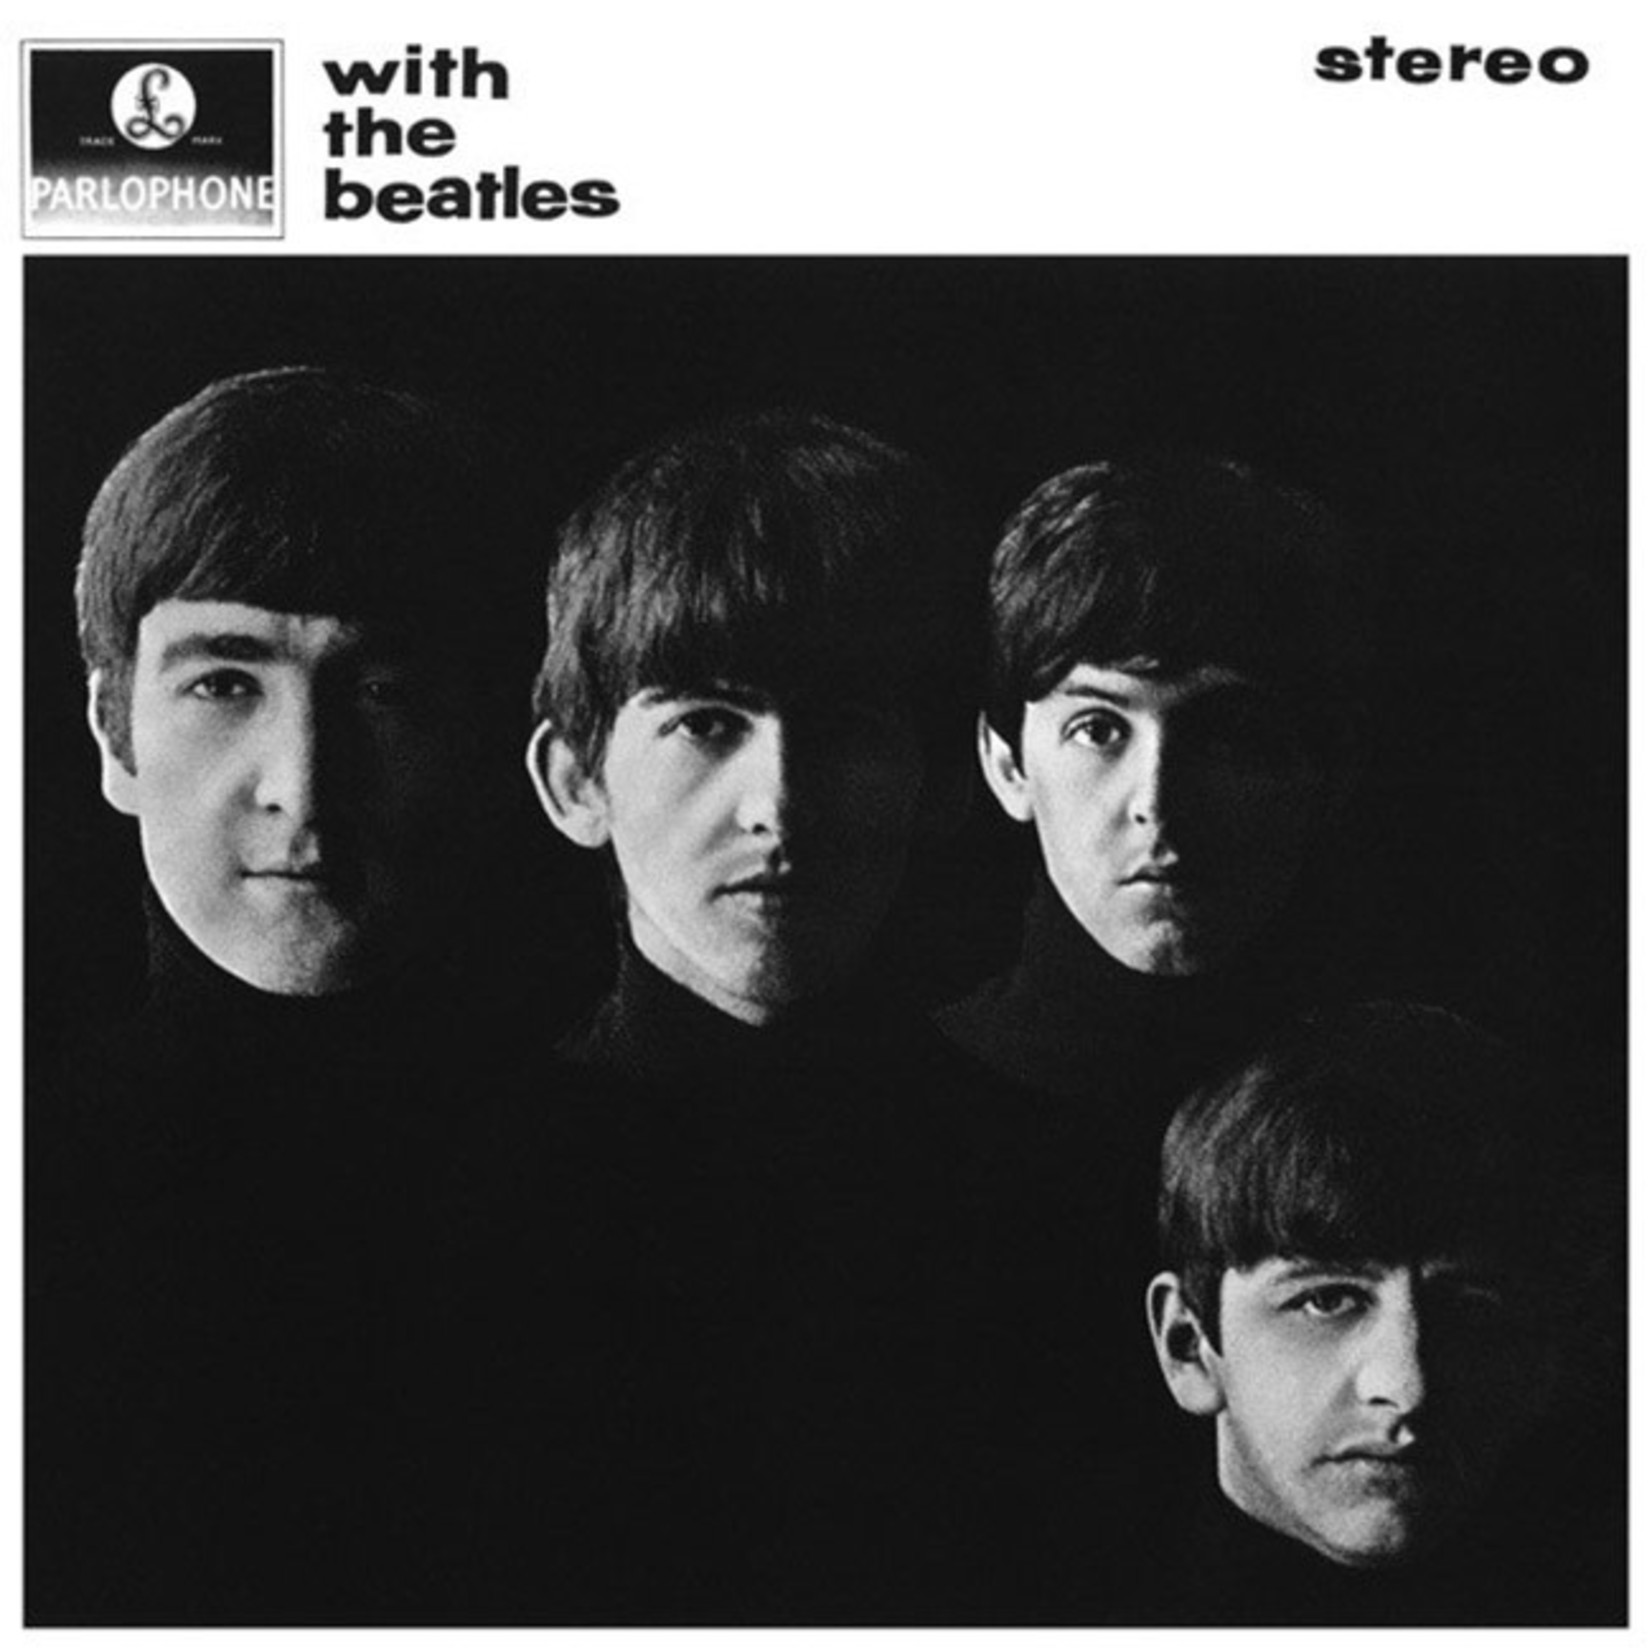 [New] Beatles - With The Beatles (stereo mix)